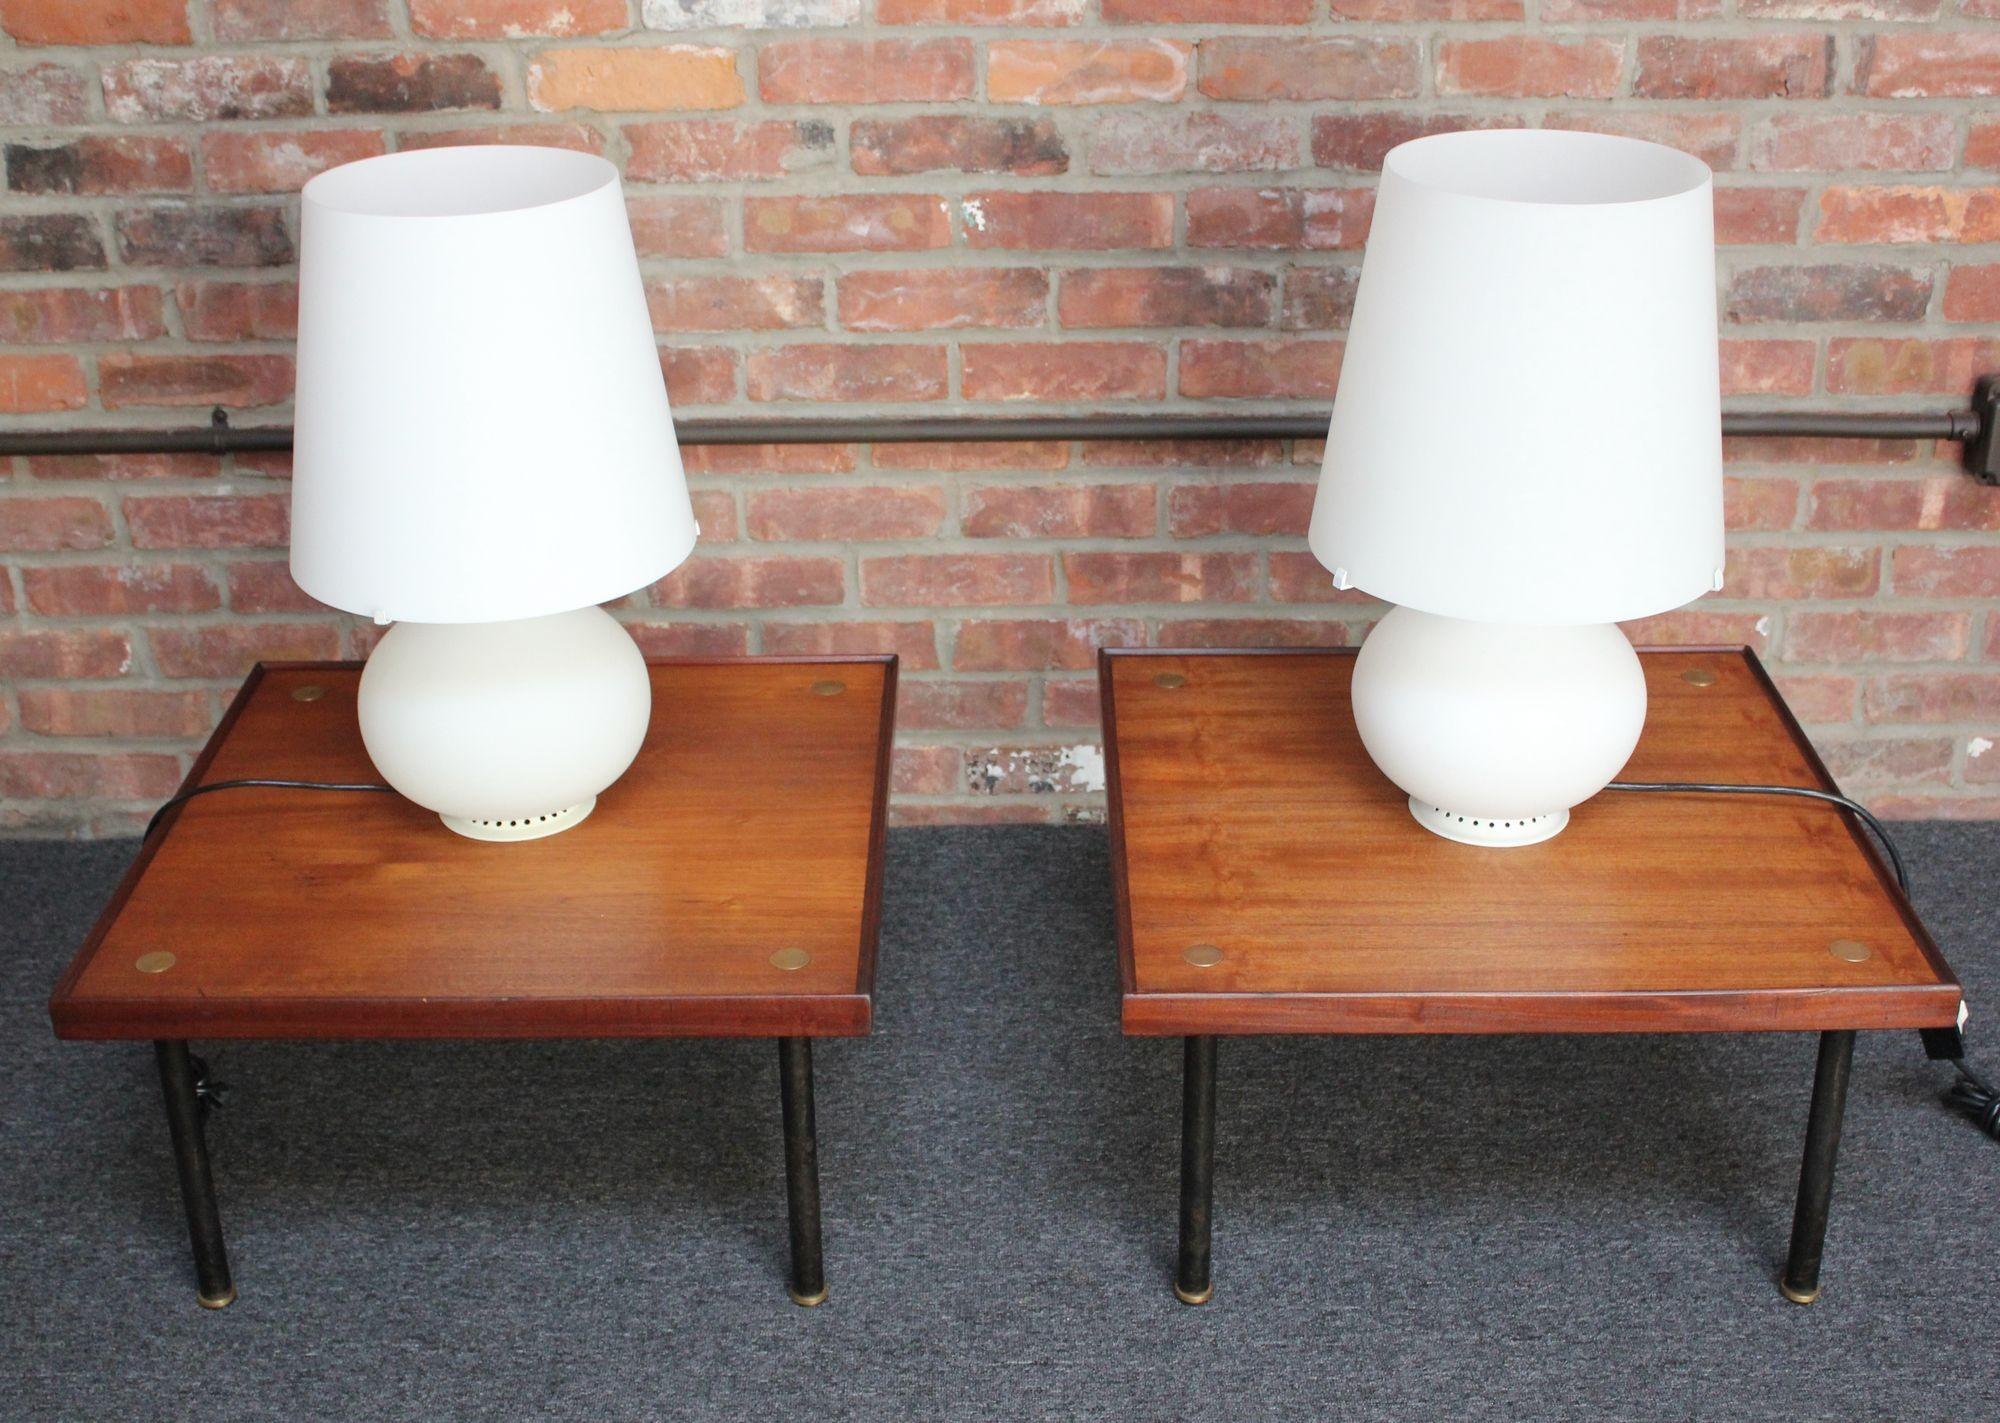 Pair of Vintage Italian Glass Table Lamps by Max Ingrand for Fontana Arte 9